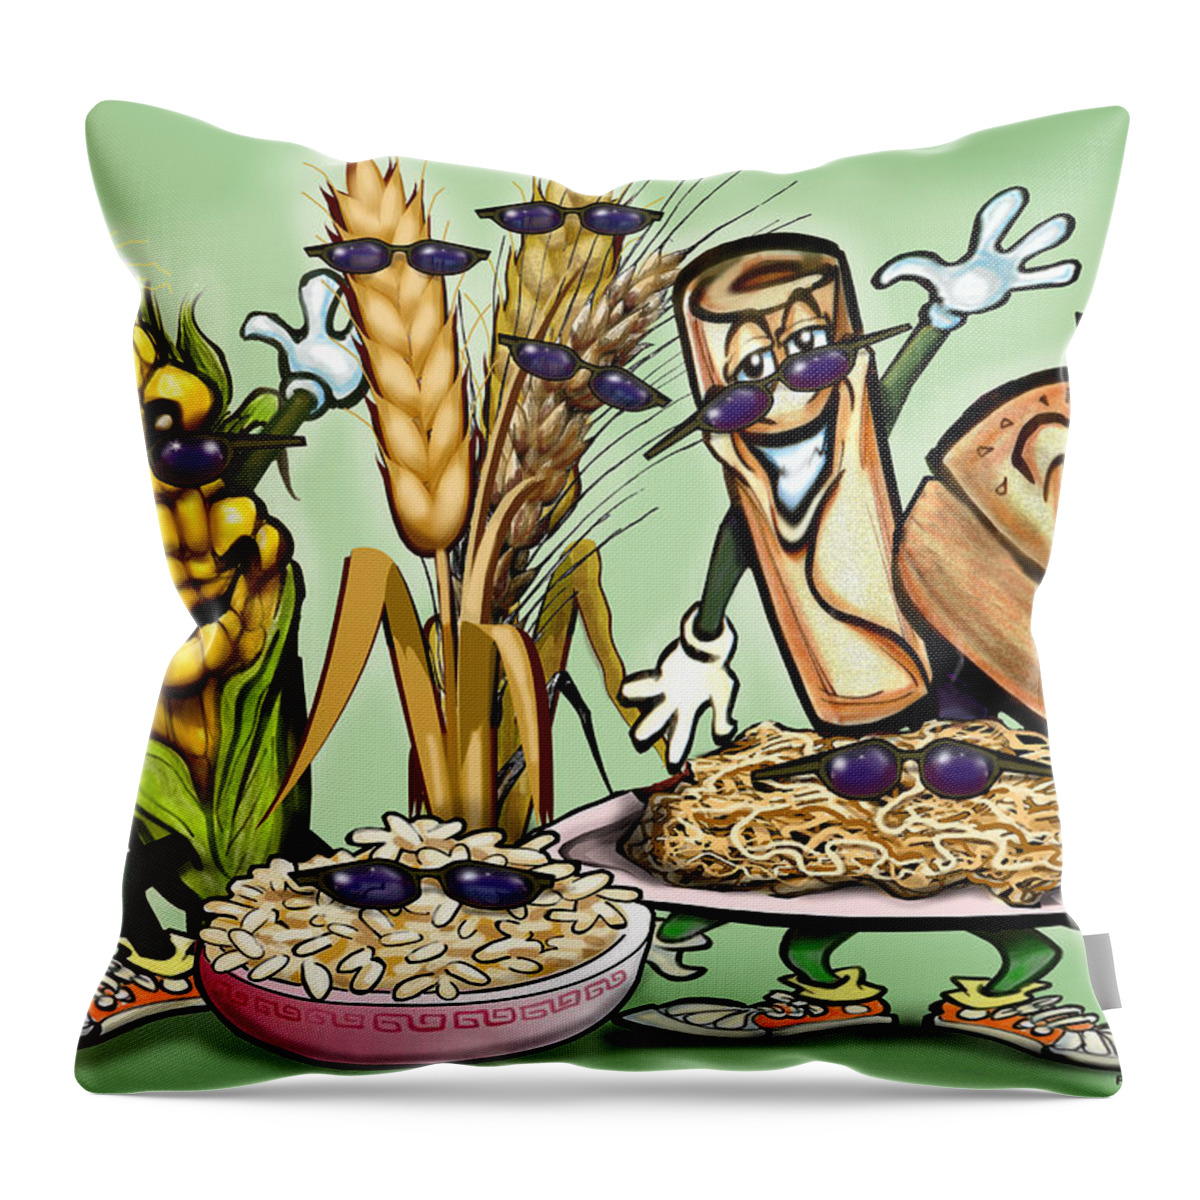  Throw Pillow featuring the painting Breads Grains Pasta by Kevin Middleton